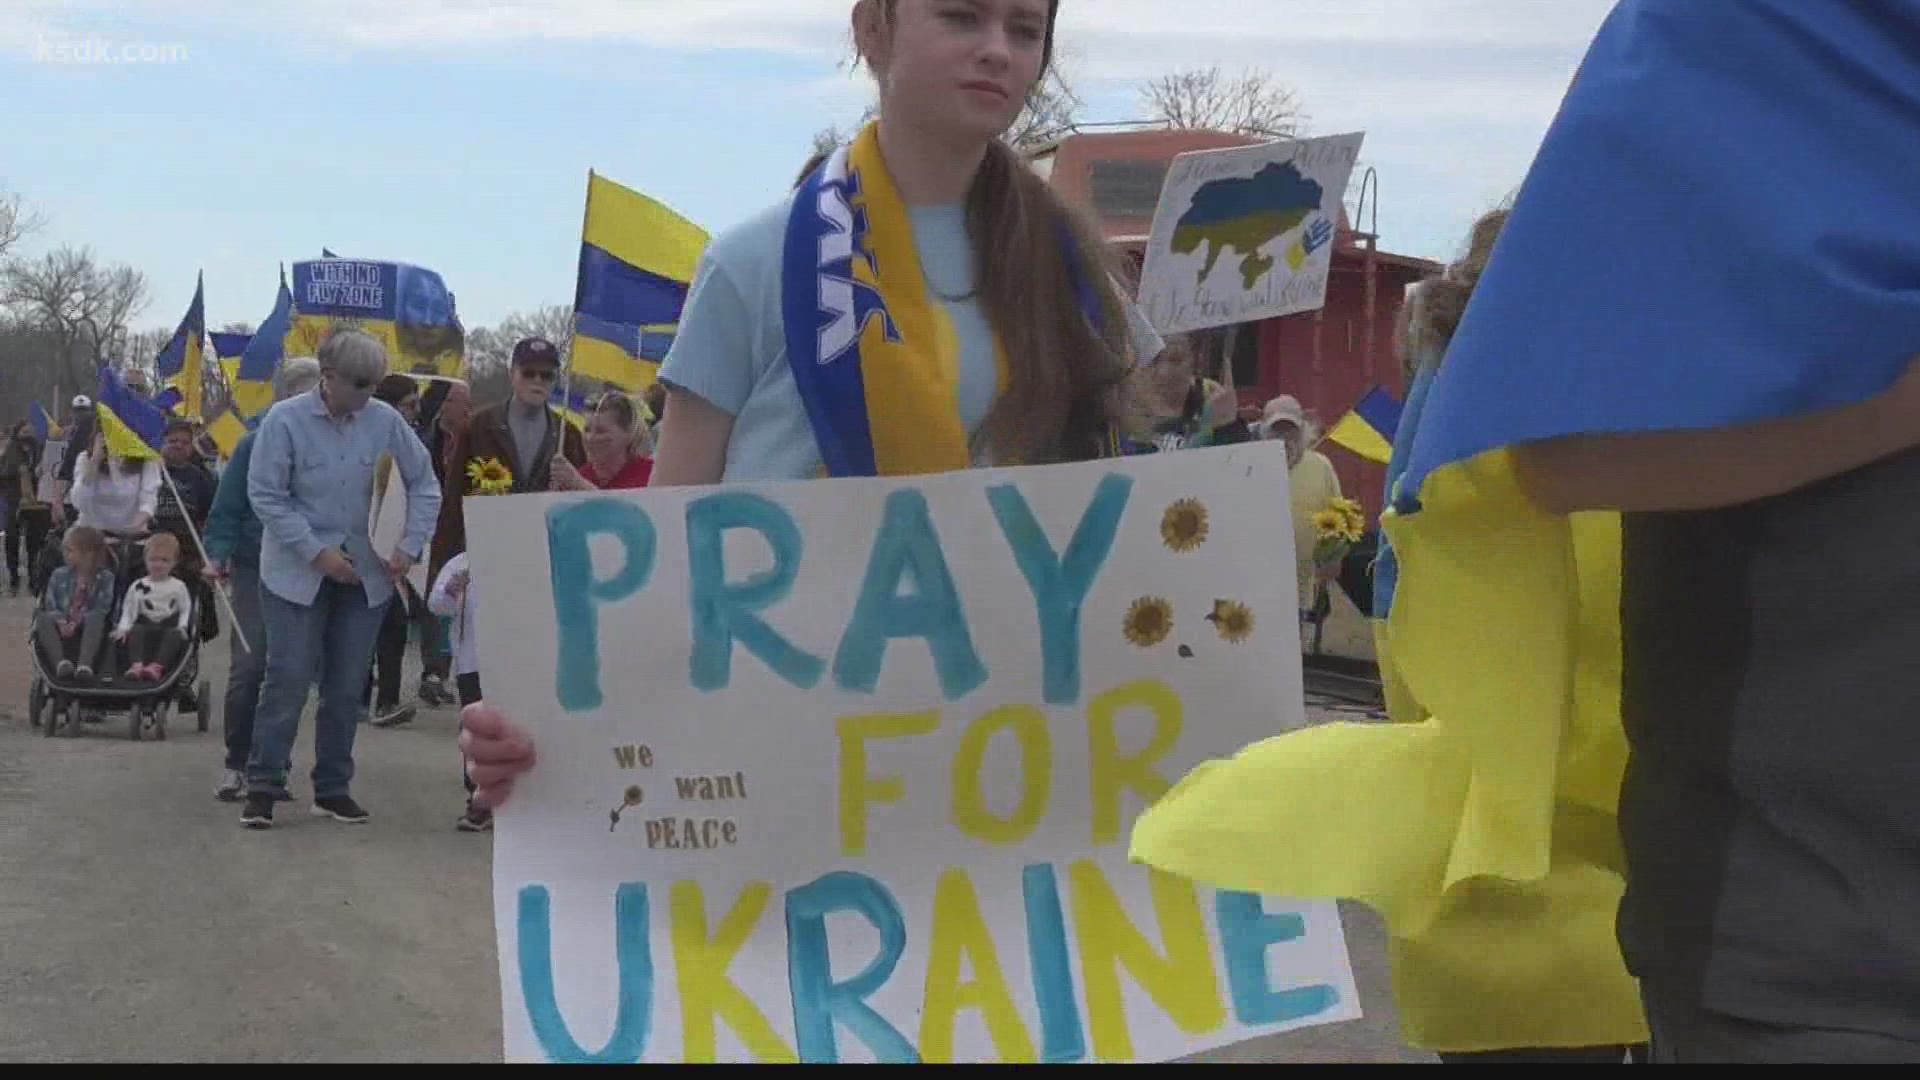 Hundreds of people gathered to voice their opposition to the Russian invasion of Ukraine that's stretched into its second week.